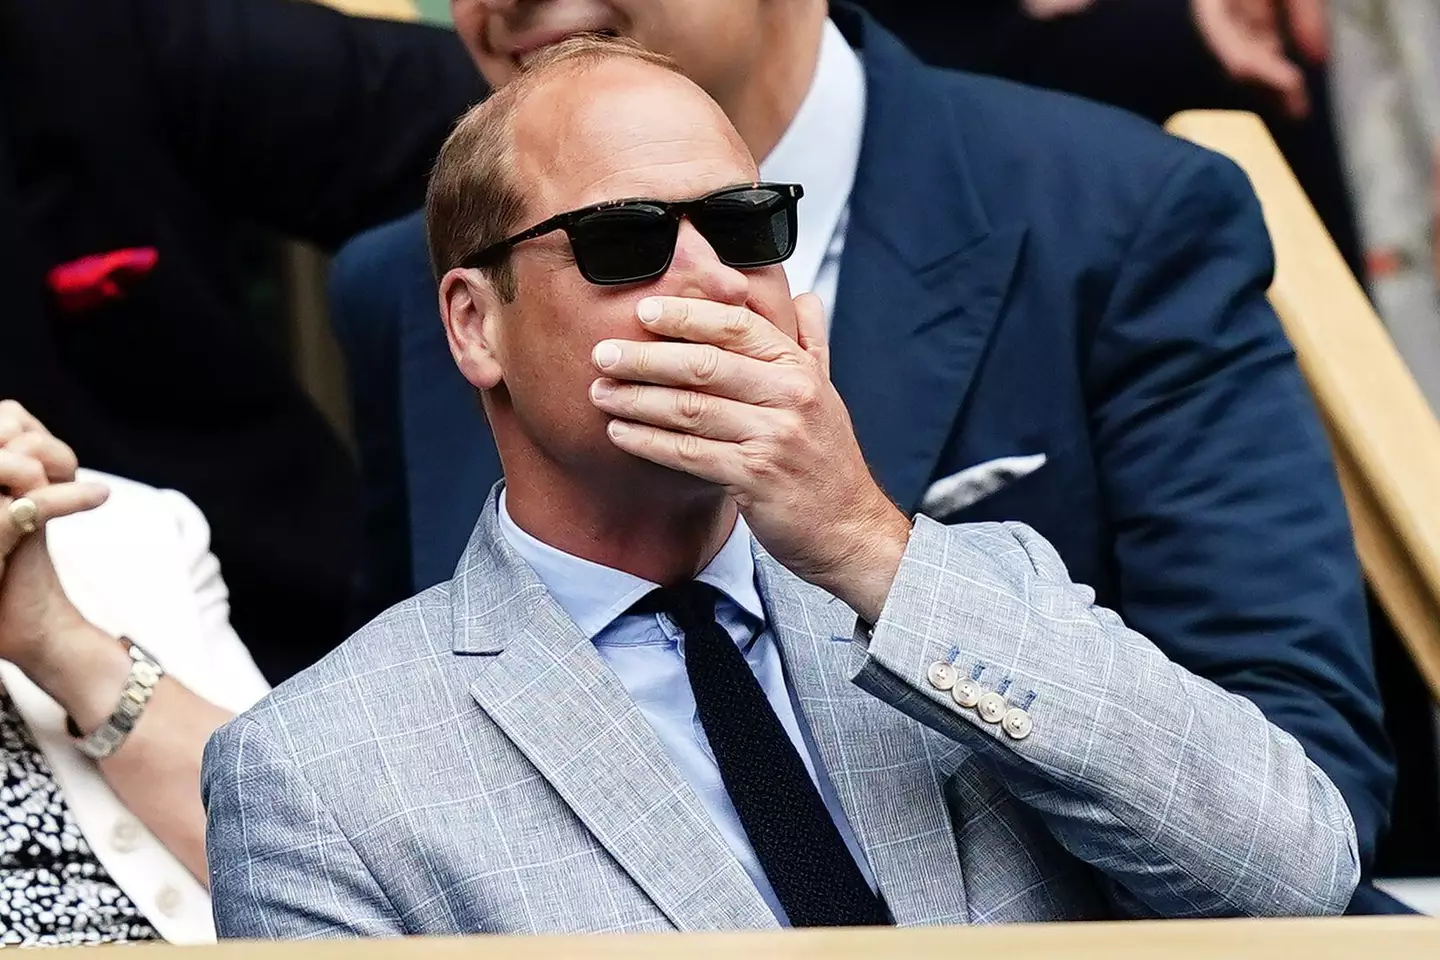 Wimbledon viewers think Prince William was caught on camera about to swear.